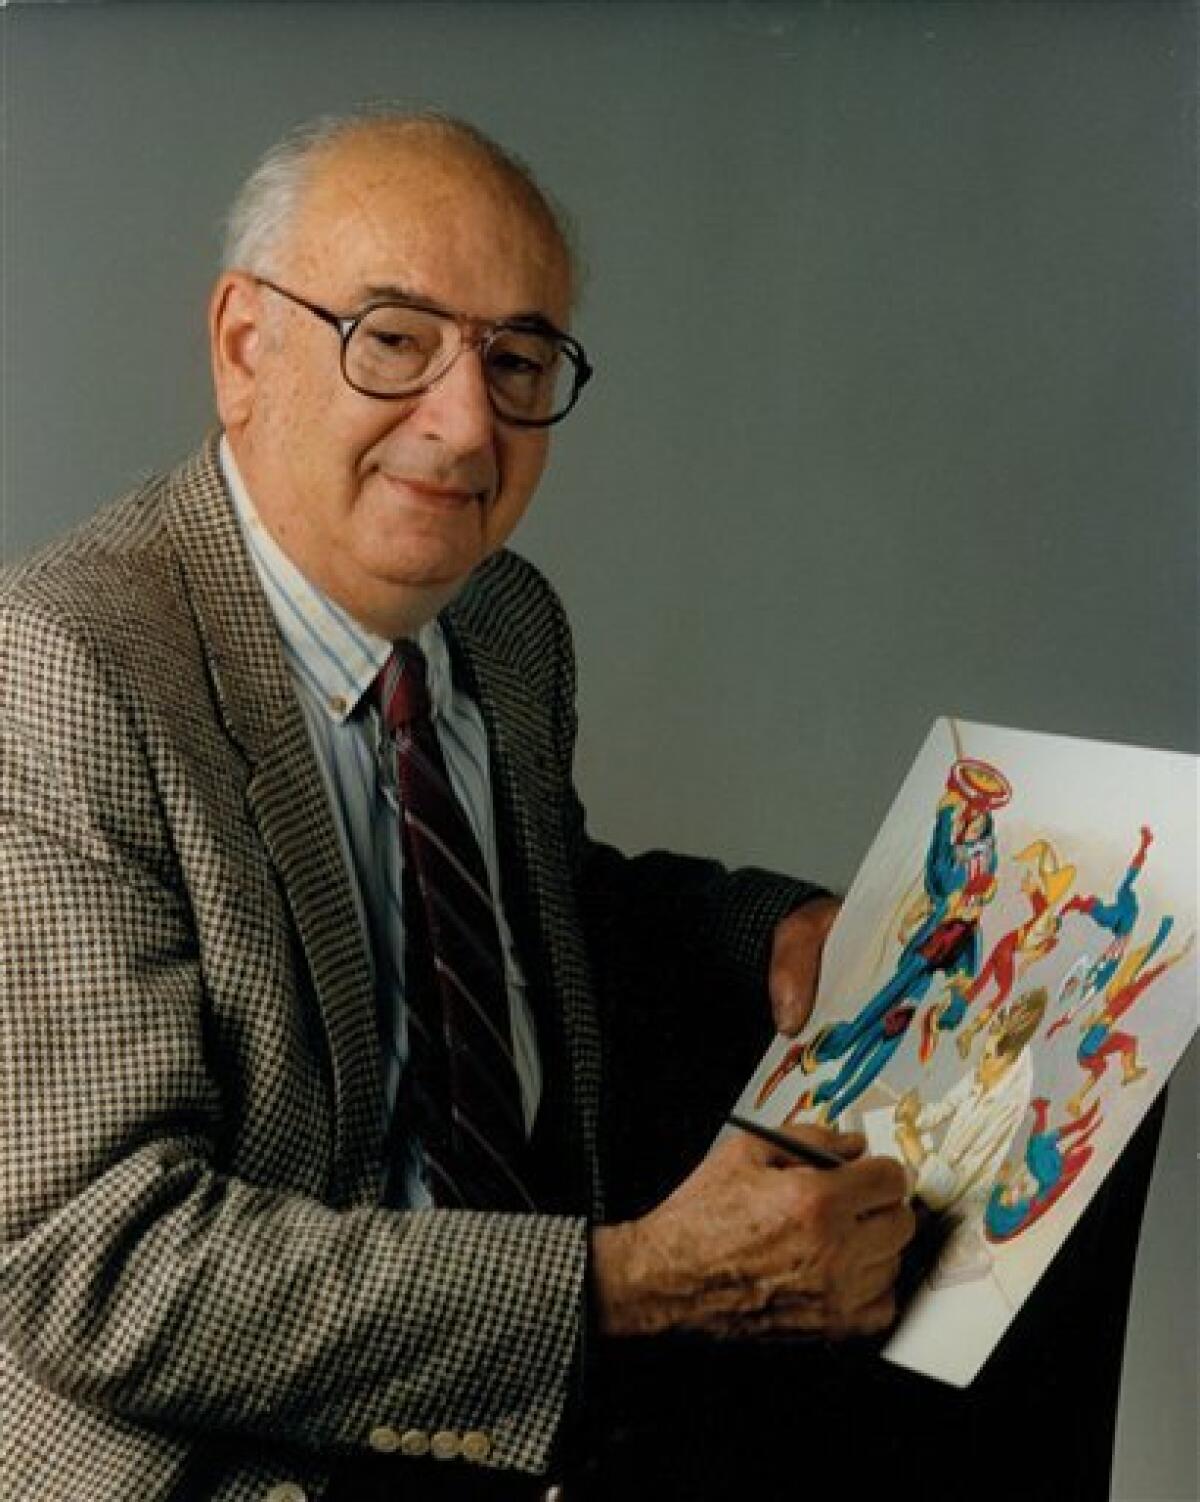 In this undated publicity photo released by Titan Books, Joe Simon, co-creator of the Captain America comic, is shown. The character proved a popular hit _ the first issue sold a million copies and put Timely Comics, the forerunner of Marvel, solidly among newsstand favorites, a position held through the 1940s and 1950s before becoming Marvel in the 1960s. (AP Photo/Titan Books)